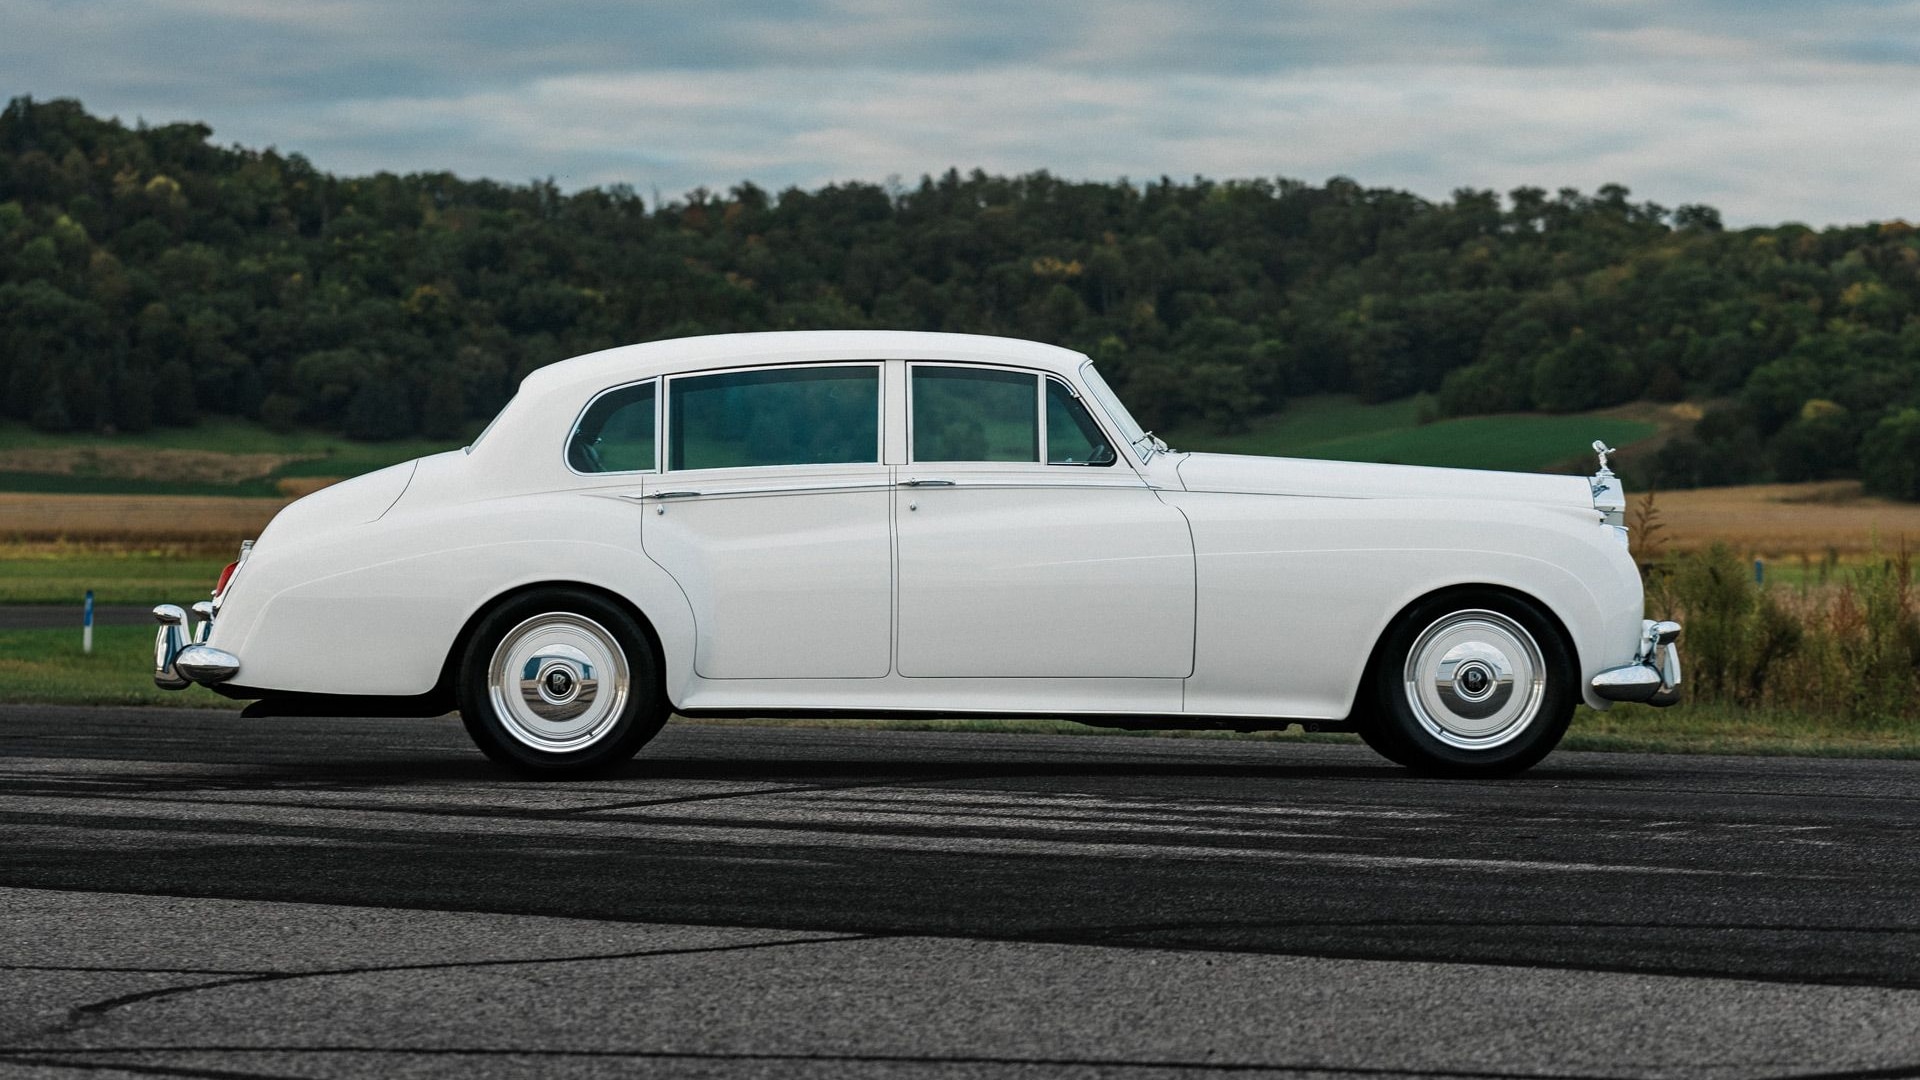 Ringbrothers' 1961 Rolls-Royce combines opulence with muscle